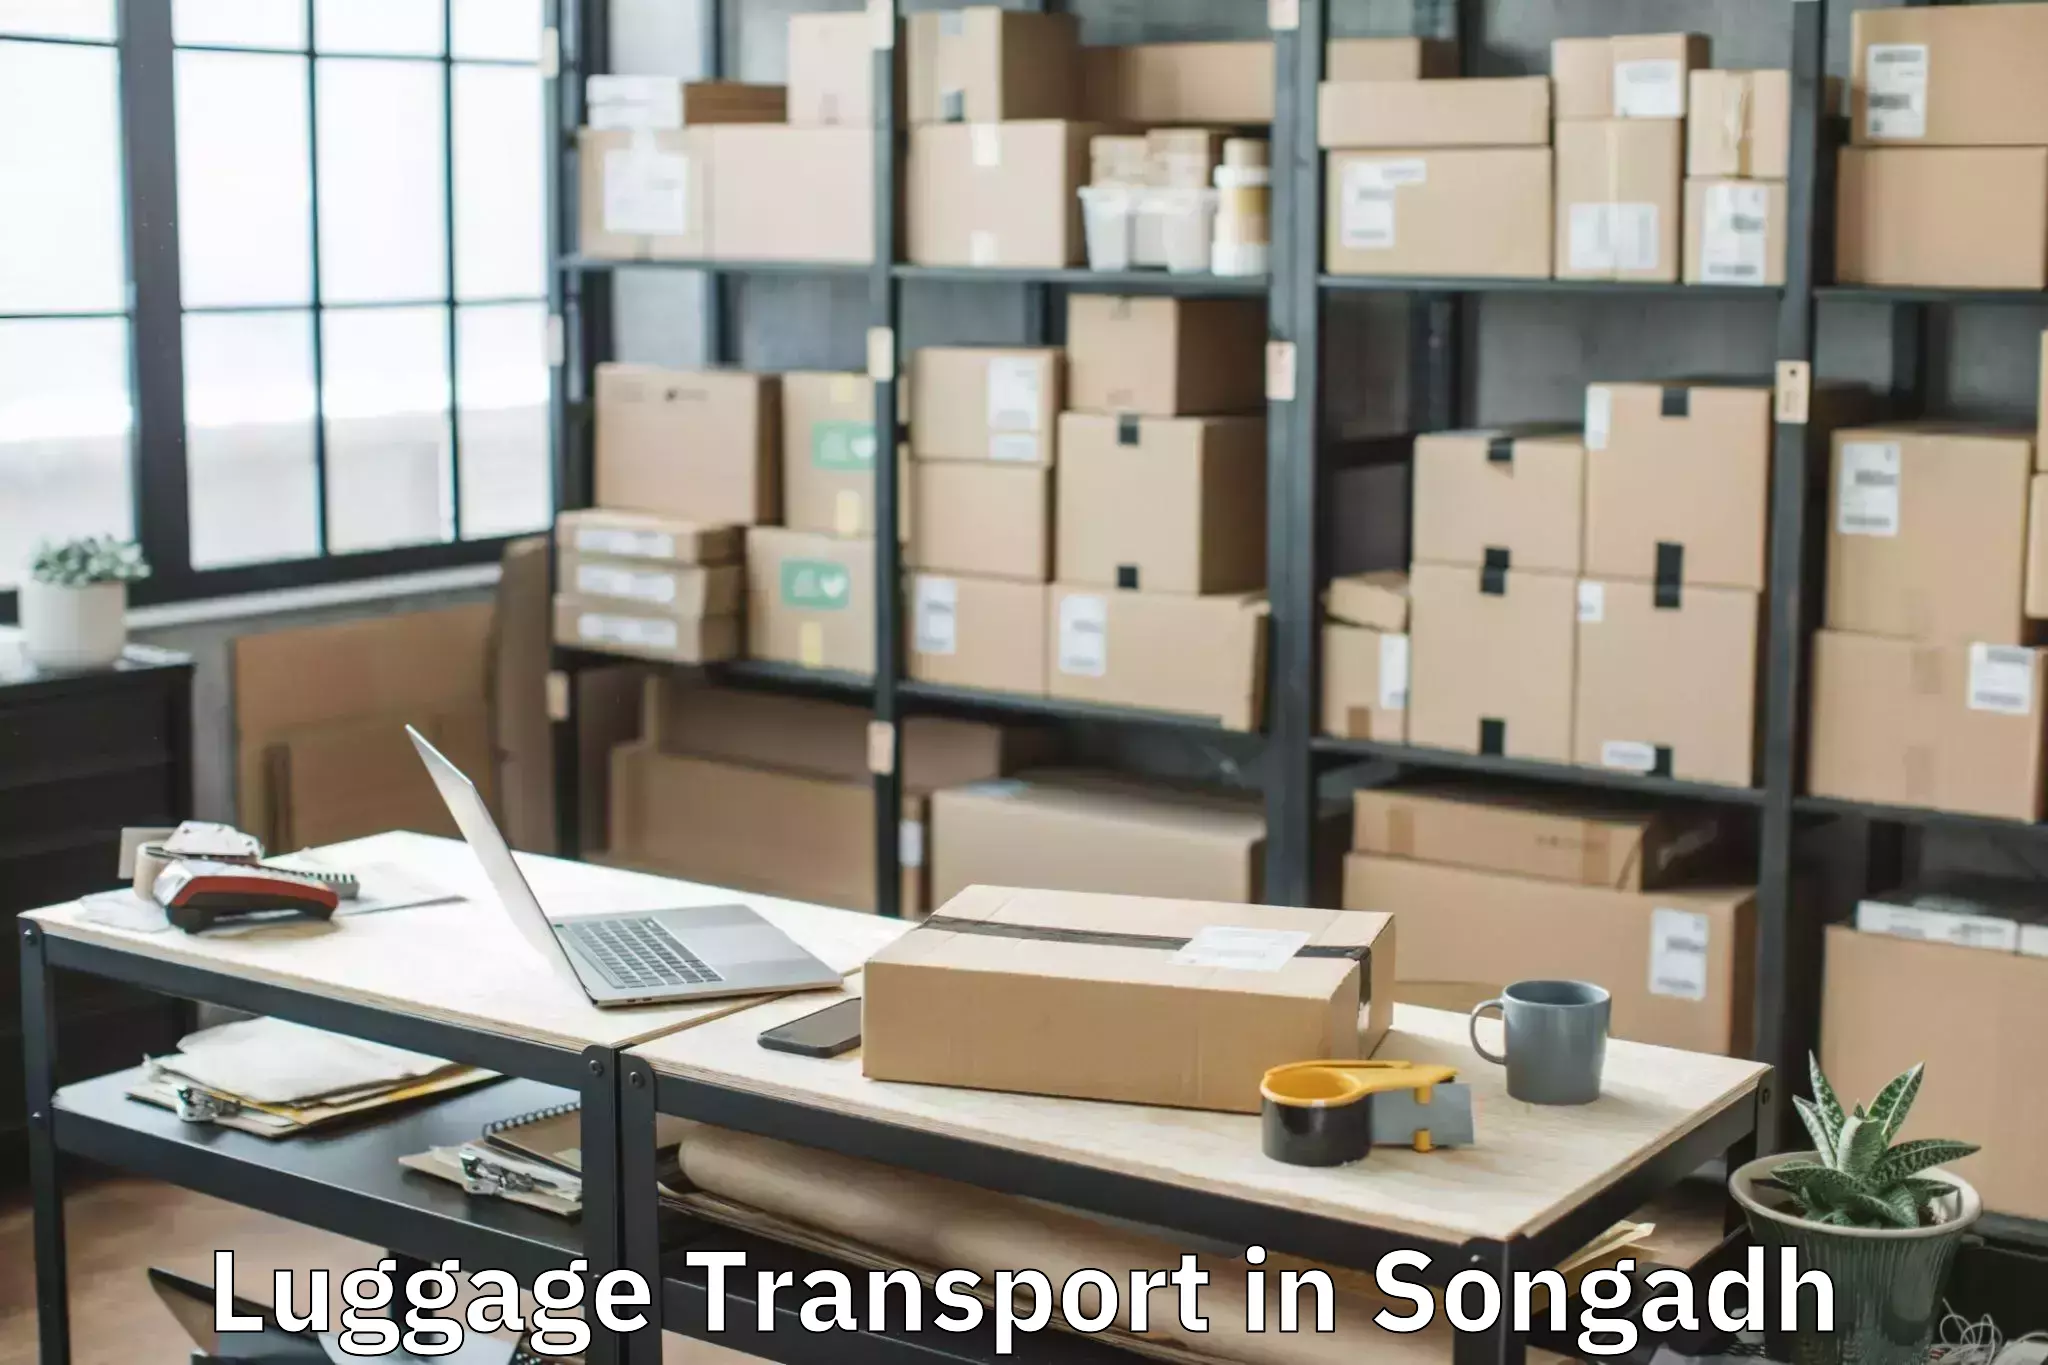 Luggage shipping estimate in Songadh